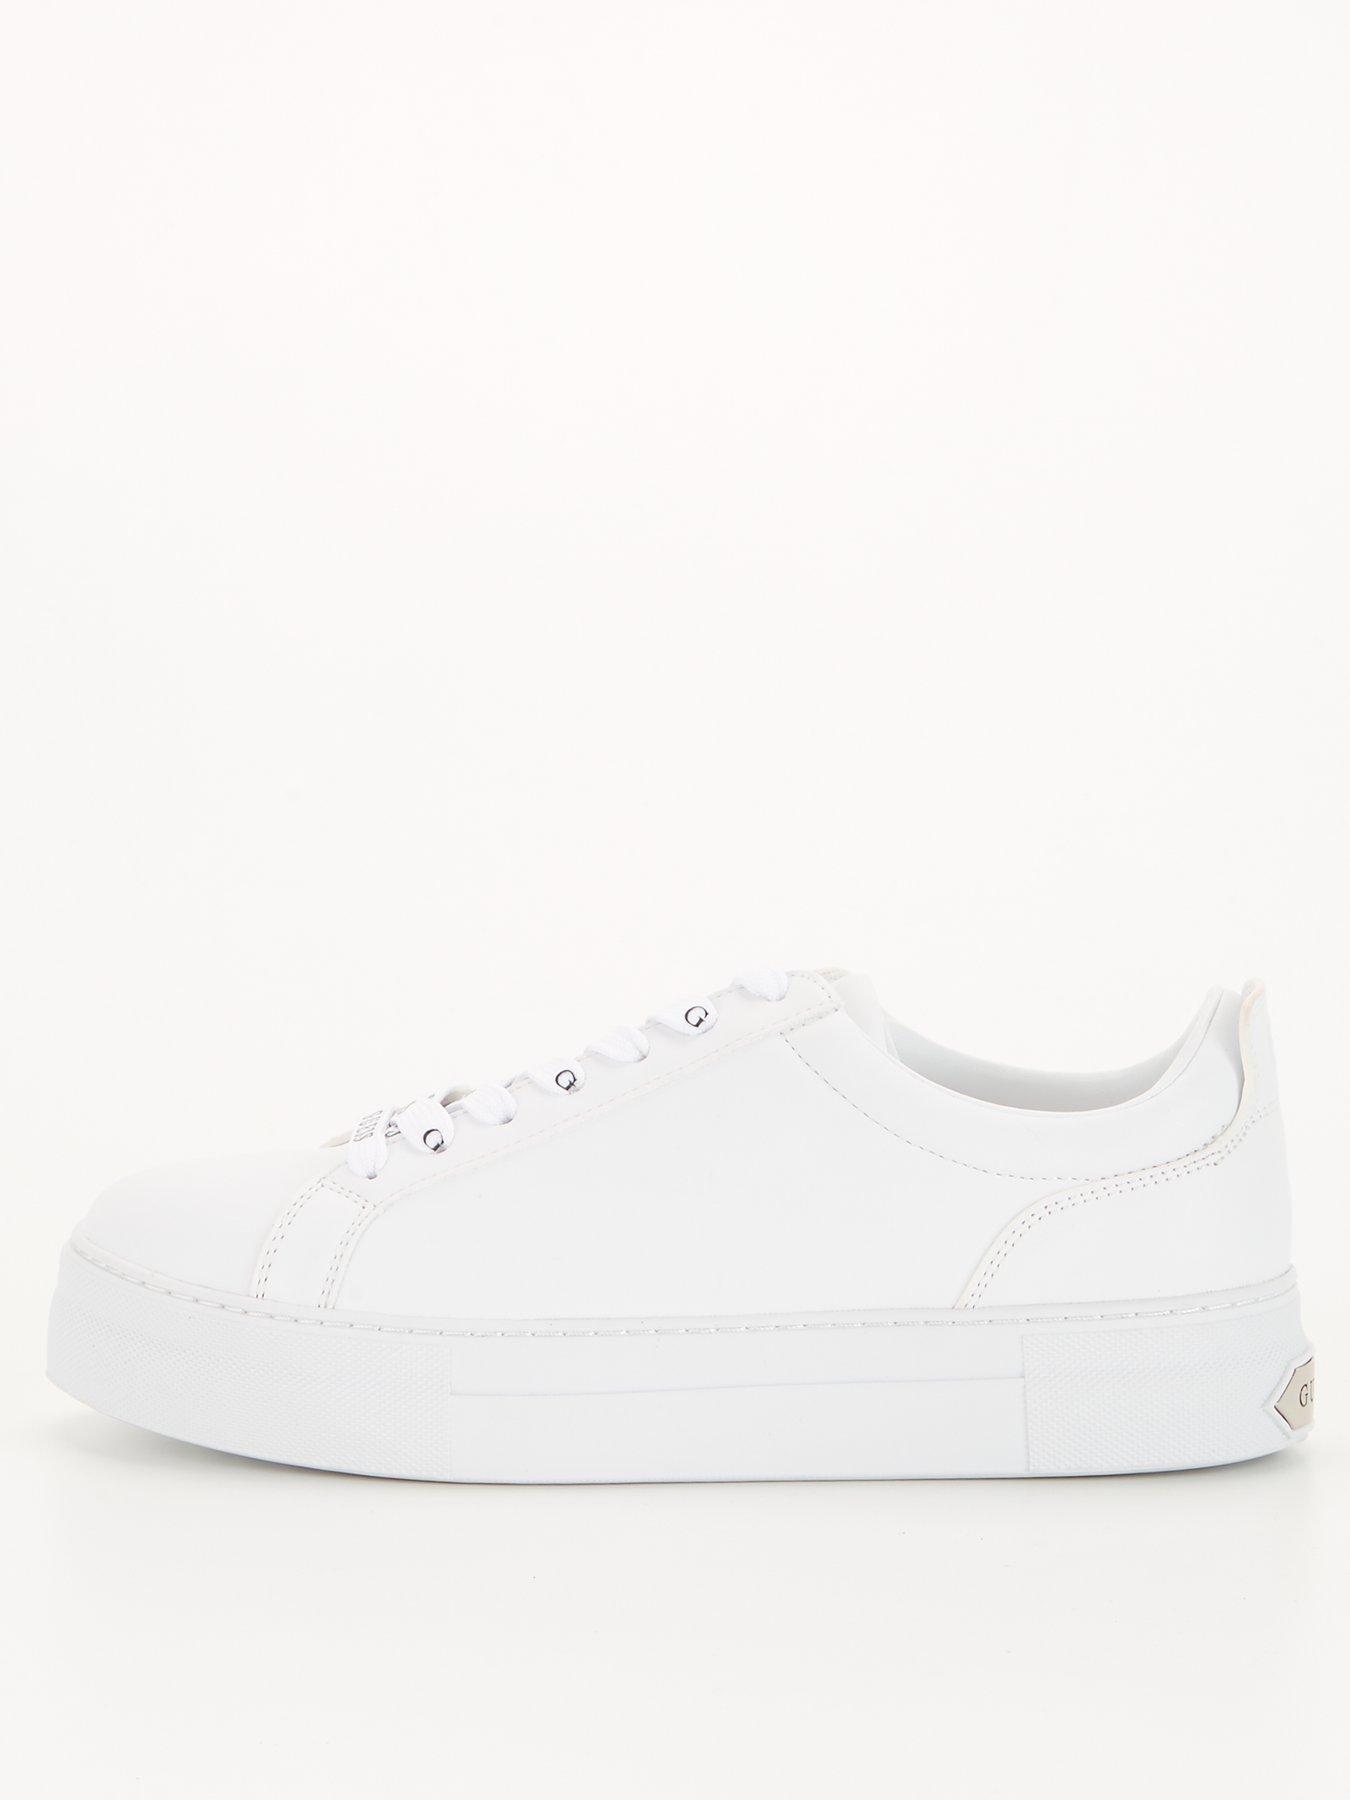 Guess Gia Flatform Trainer - White | very.co.uk